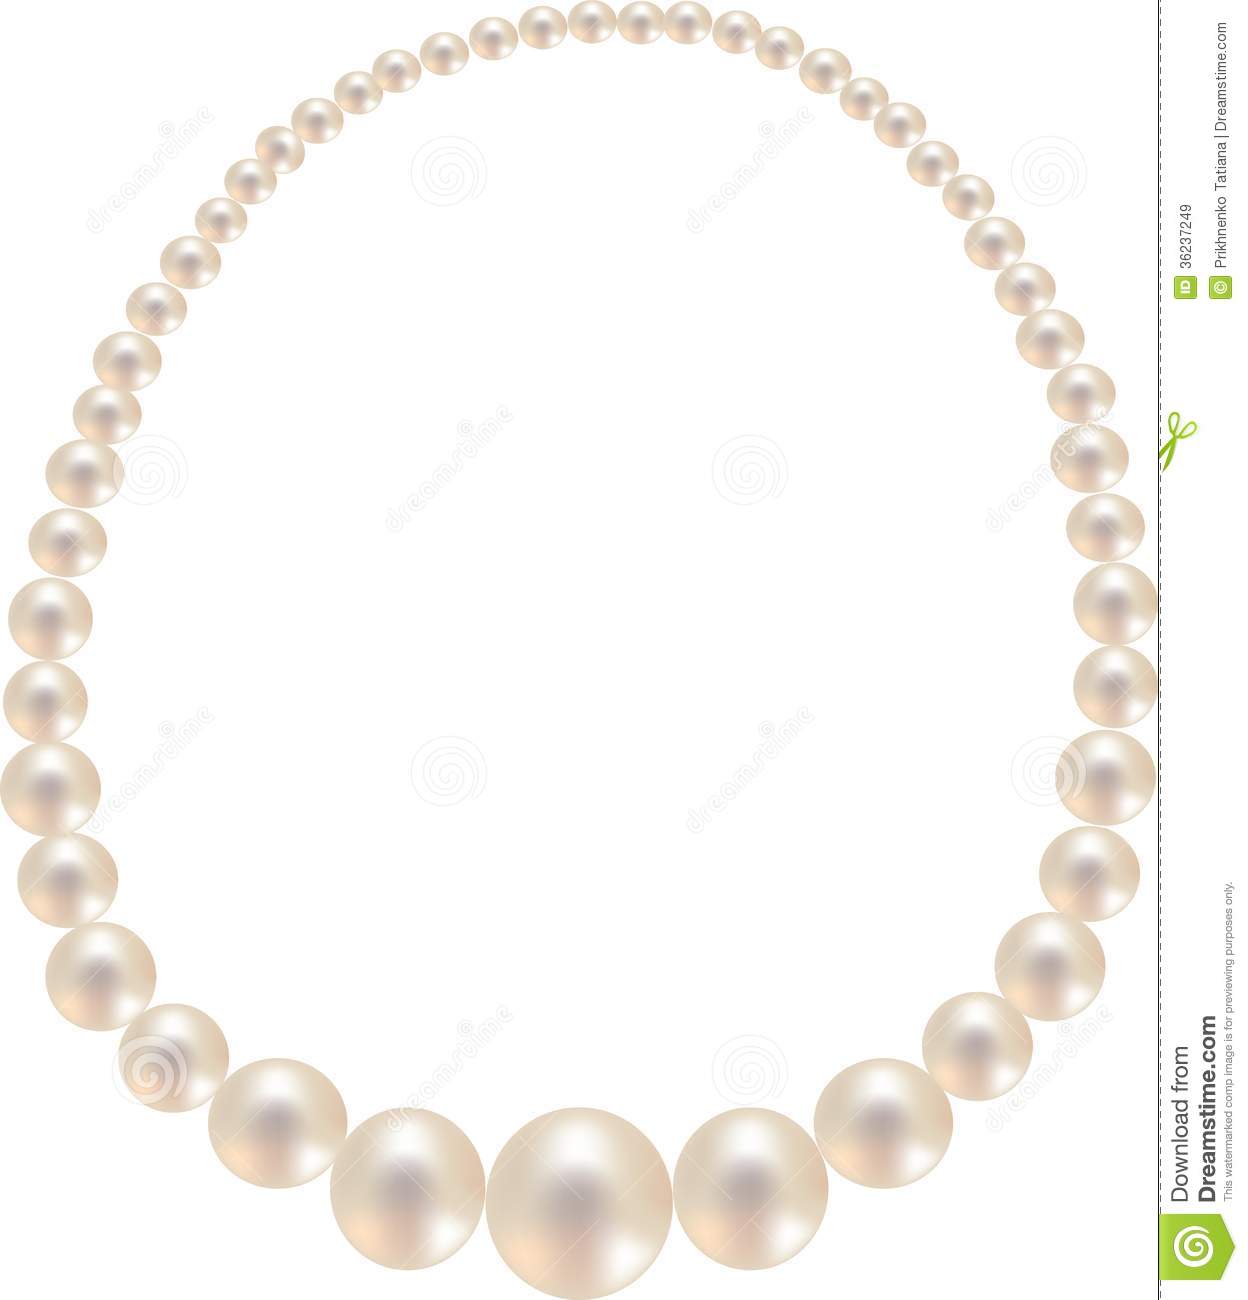 Pearl Necklace Royalty Free Stock Images   Image  36237249